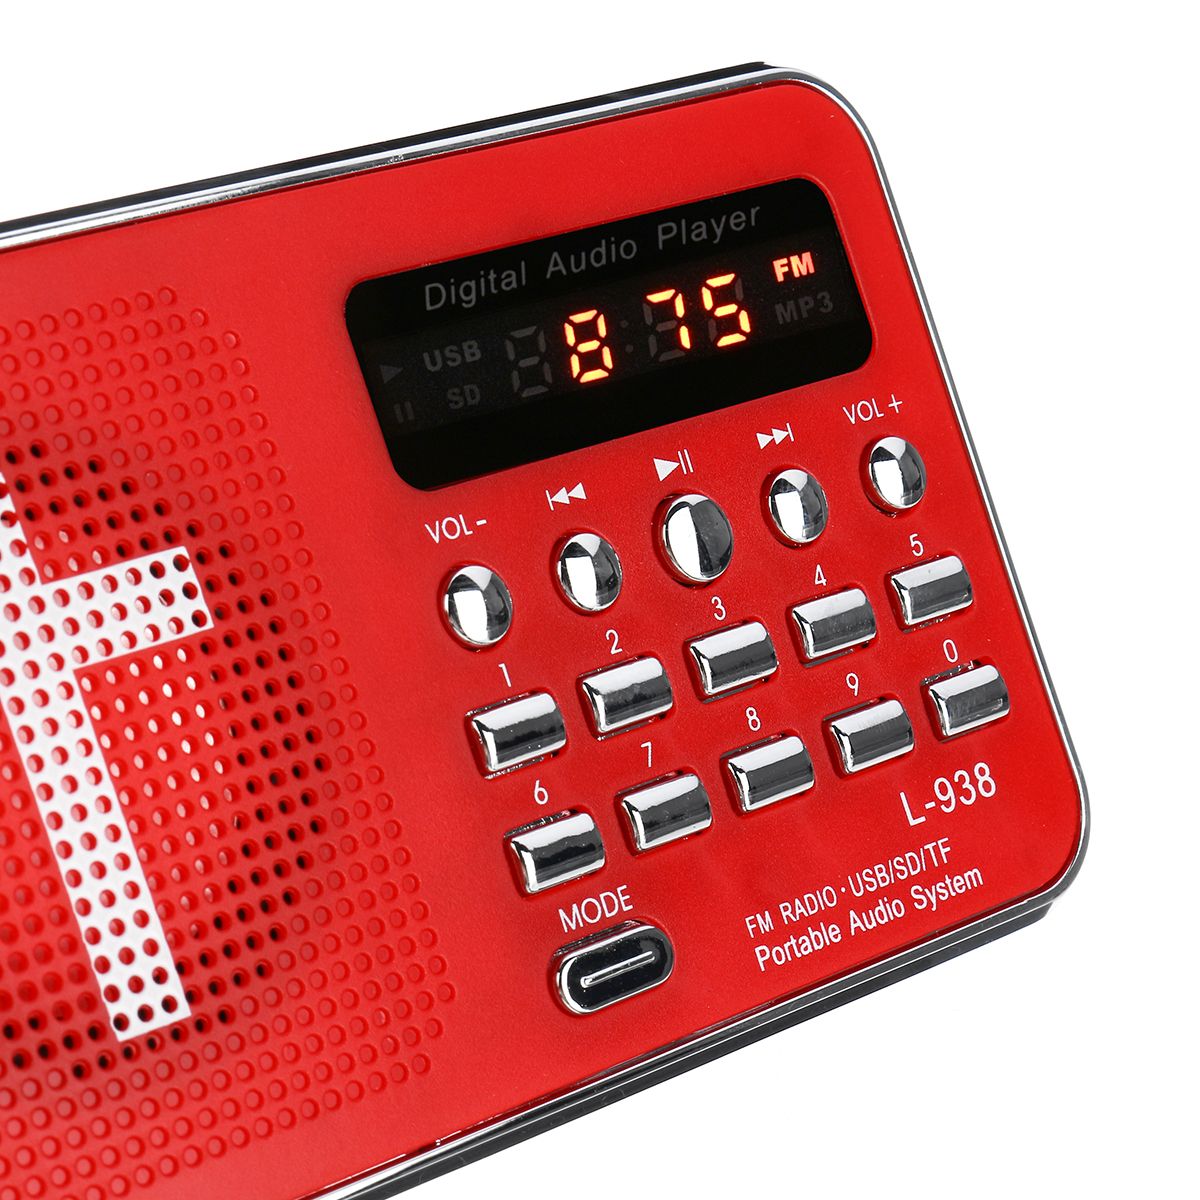 Bible-AUX-U-disk-TF-SD-Card-Audio-MP3-Music-Player-Portable-Mini-FM-Radio-Speakers-For-Elders-Gift-1430278